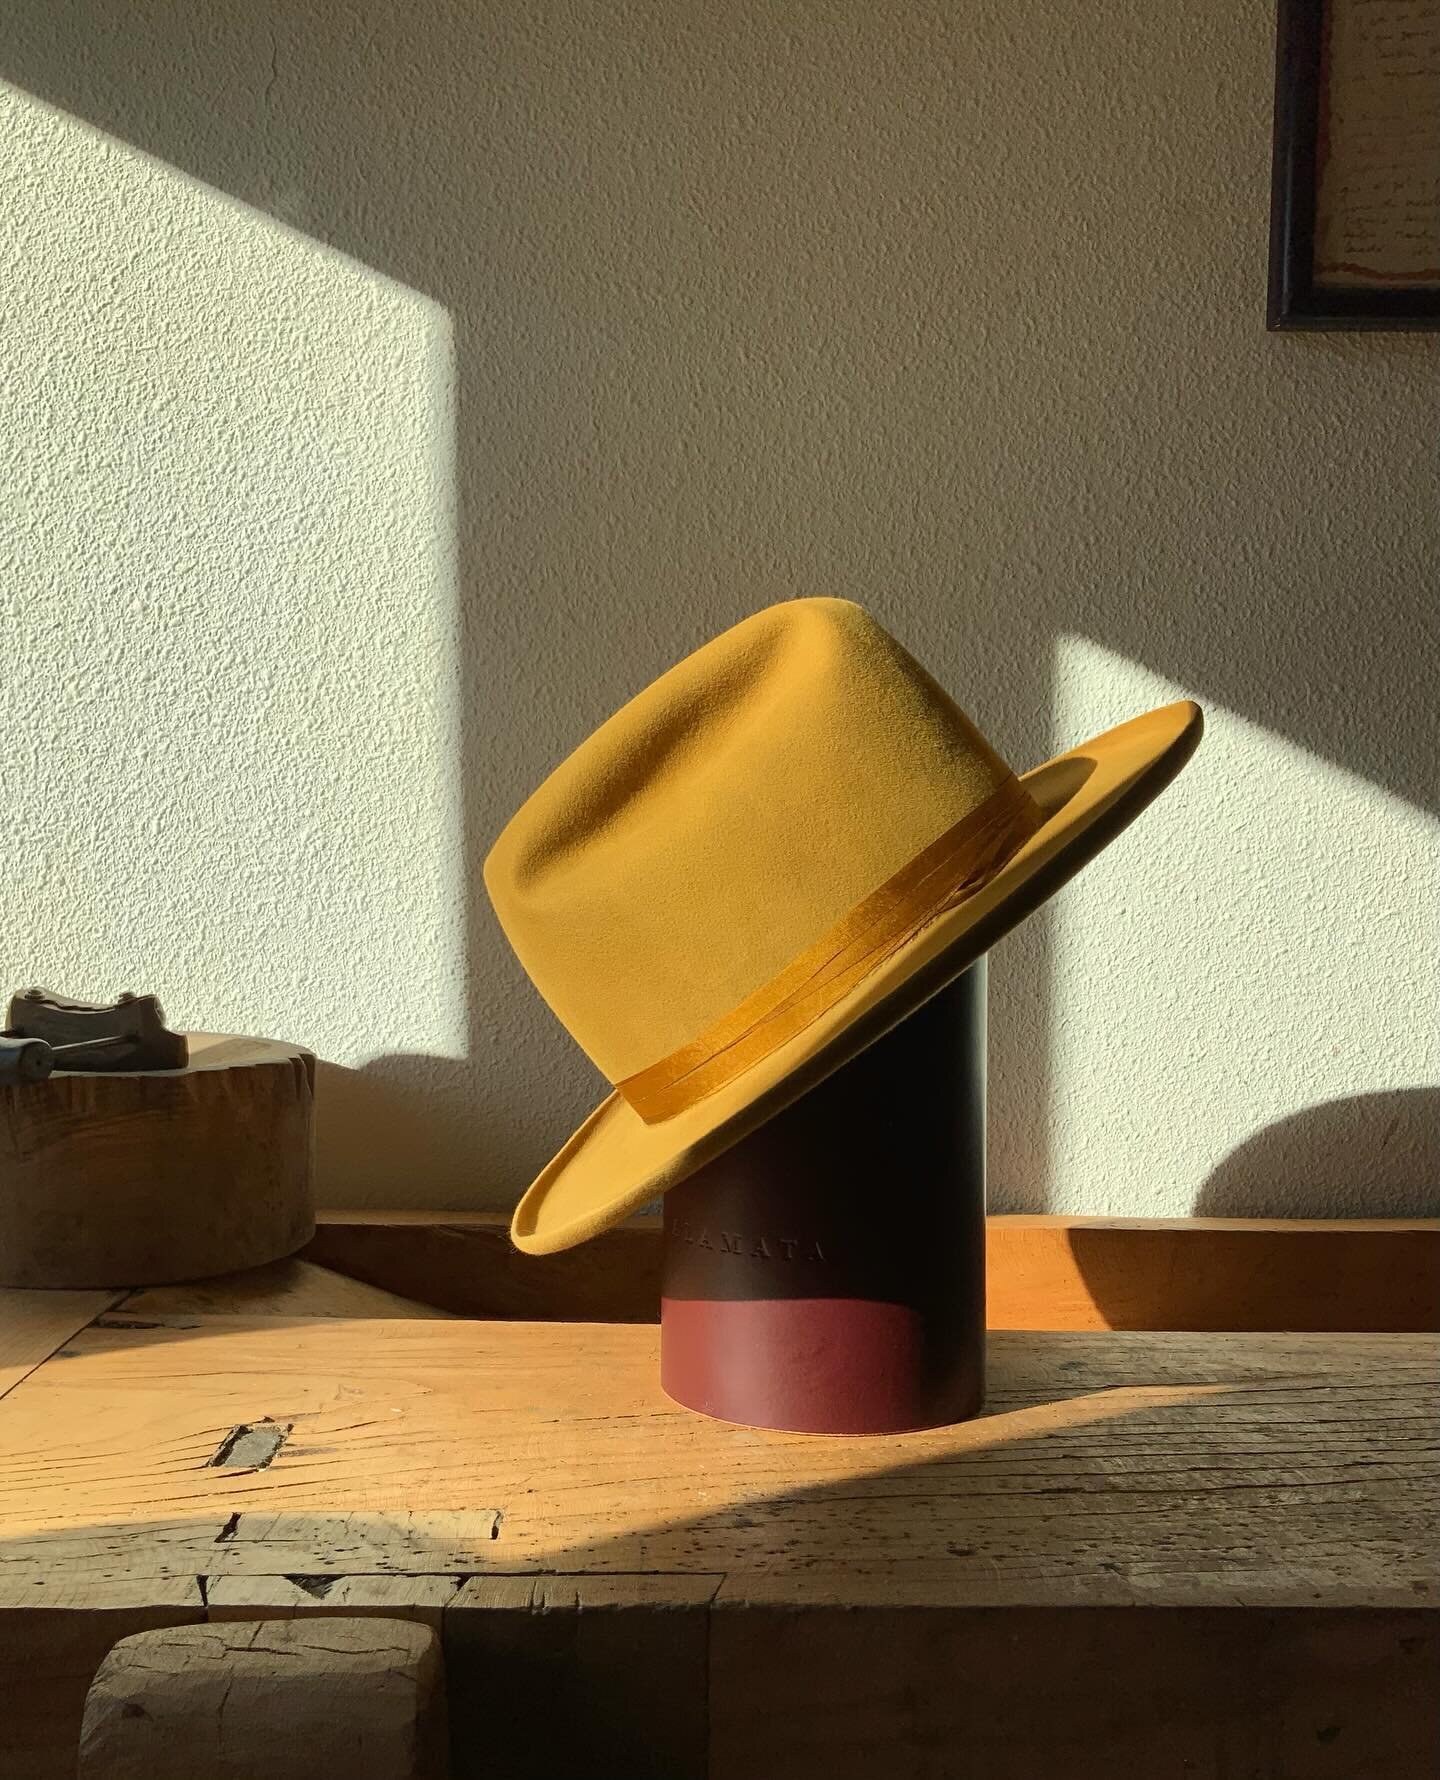 RAM
.
A 14 cm cattleman crown and 7 cm brim (after curling) for this beaver (130 grs) hat. Felt, satin silk for the lining, inner and outer silk ribbon as well as the silk thread for sewing it all dyed with &ldquo;rheum emido&rdquo; (himalayan rhubar